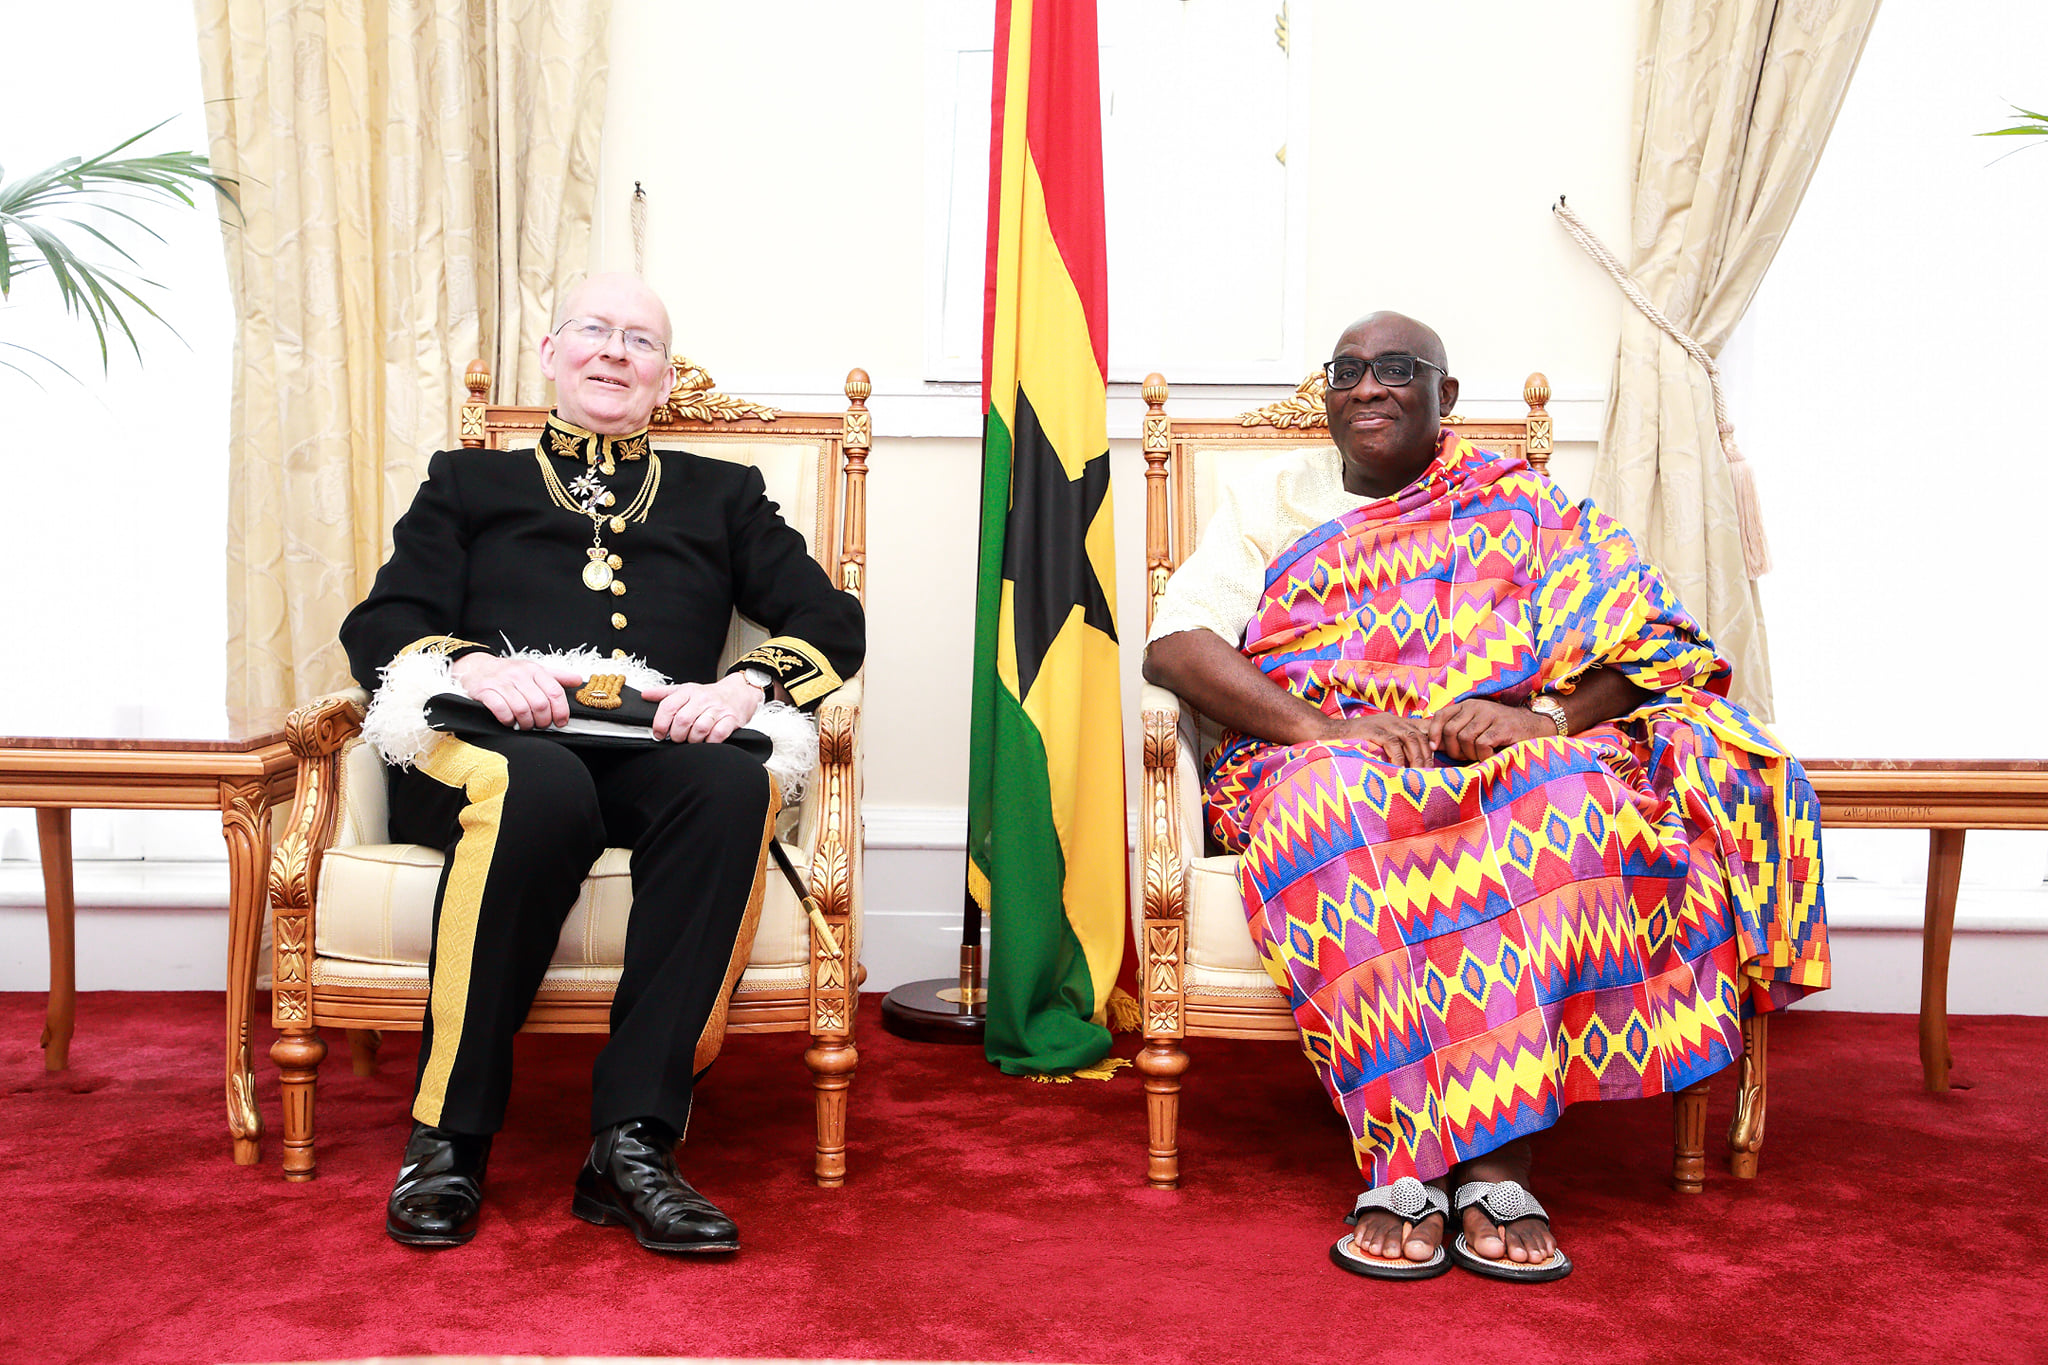 Papa Owusu Ankomah presents letters of credence to Queen Elizabeth II